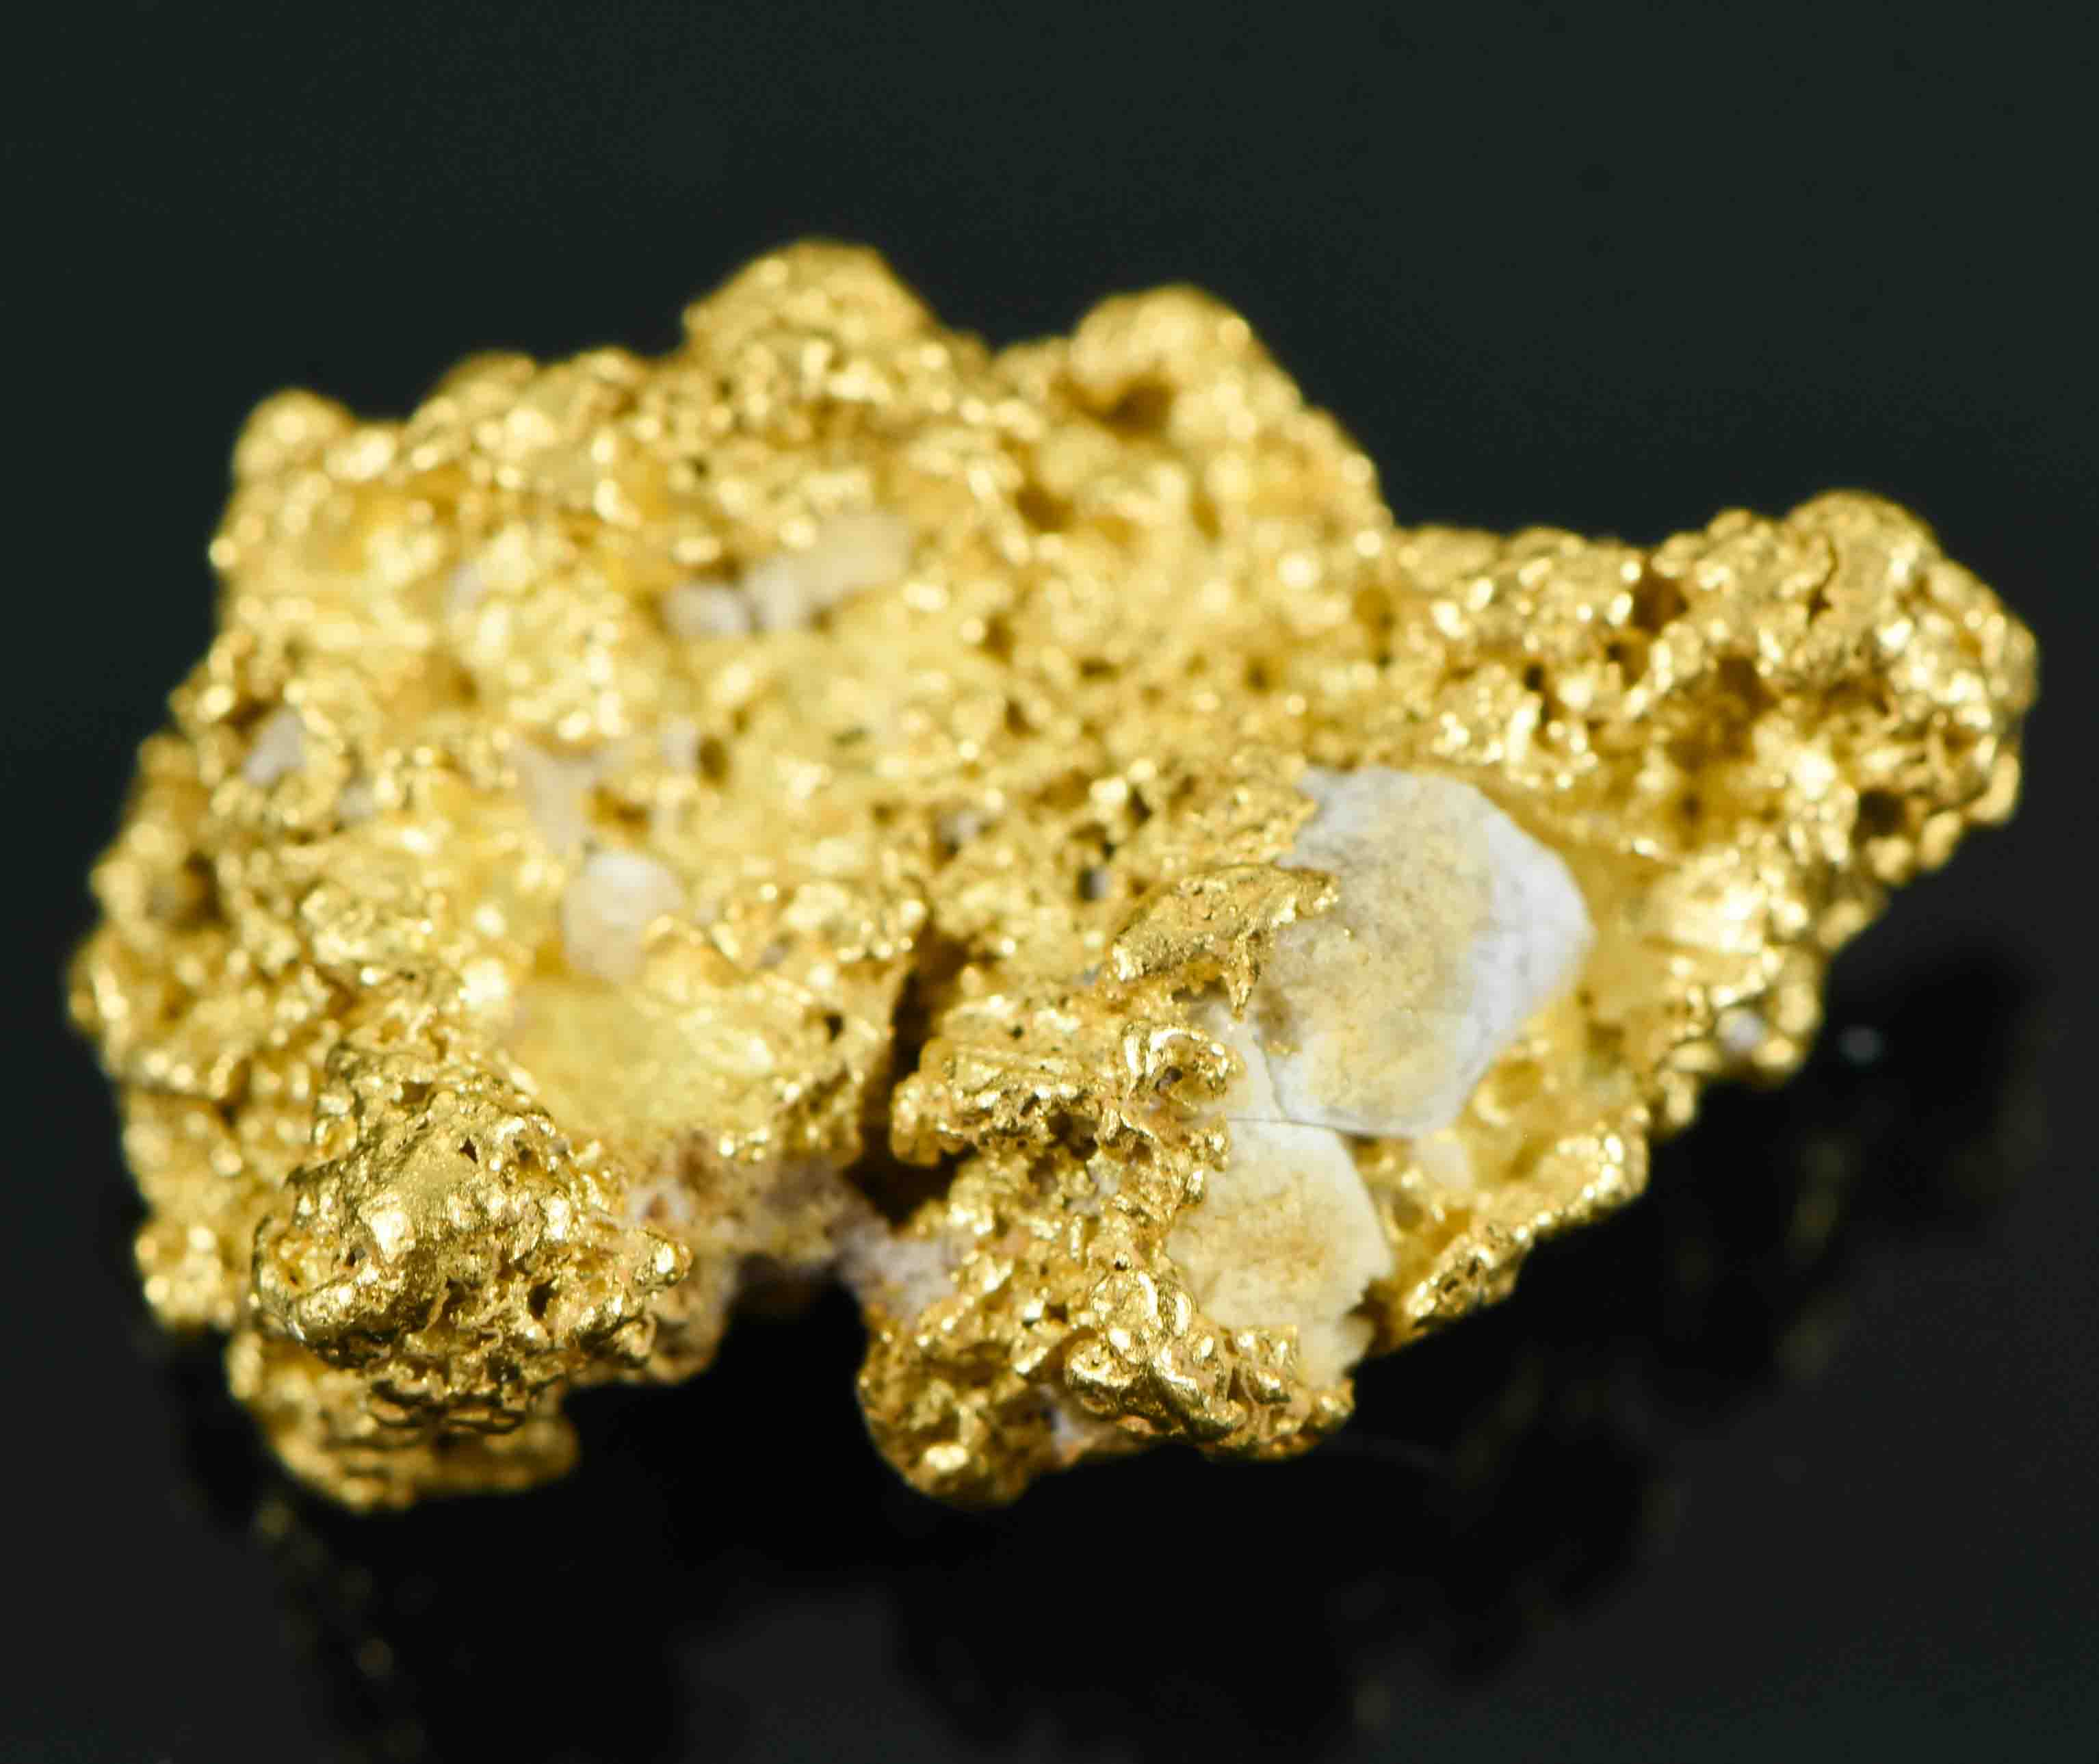 #32 Australian Natural Gold Nugget With Quartz Weighs 4.43 Grams.